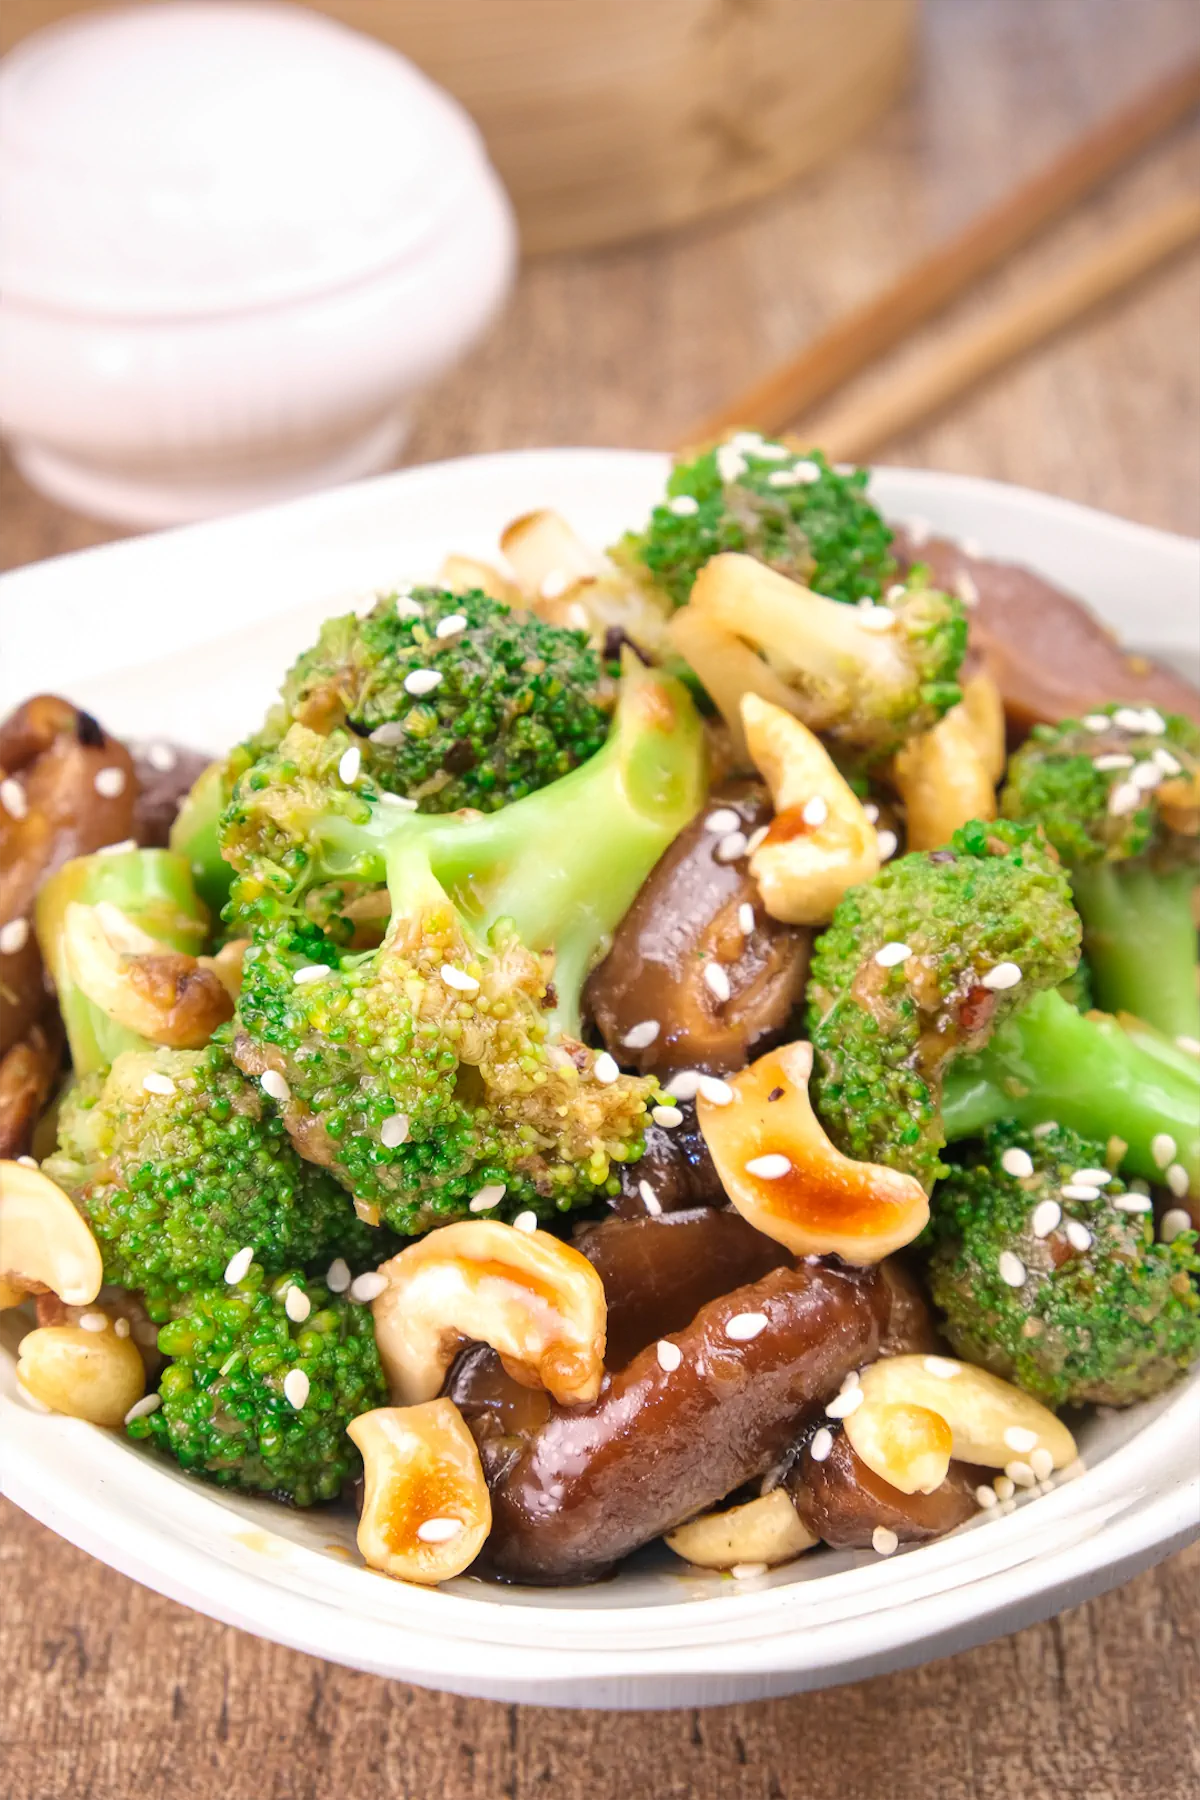 Low-carb broccoli and mushrooms in an Asian sauce presented in a bowl and garnished with cashews.